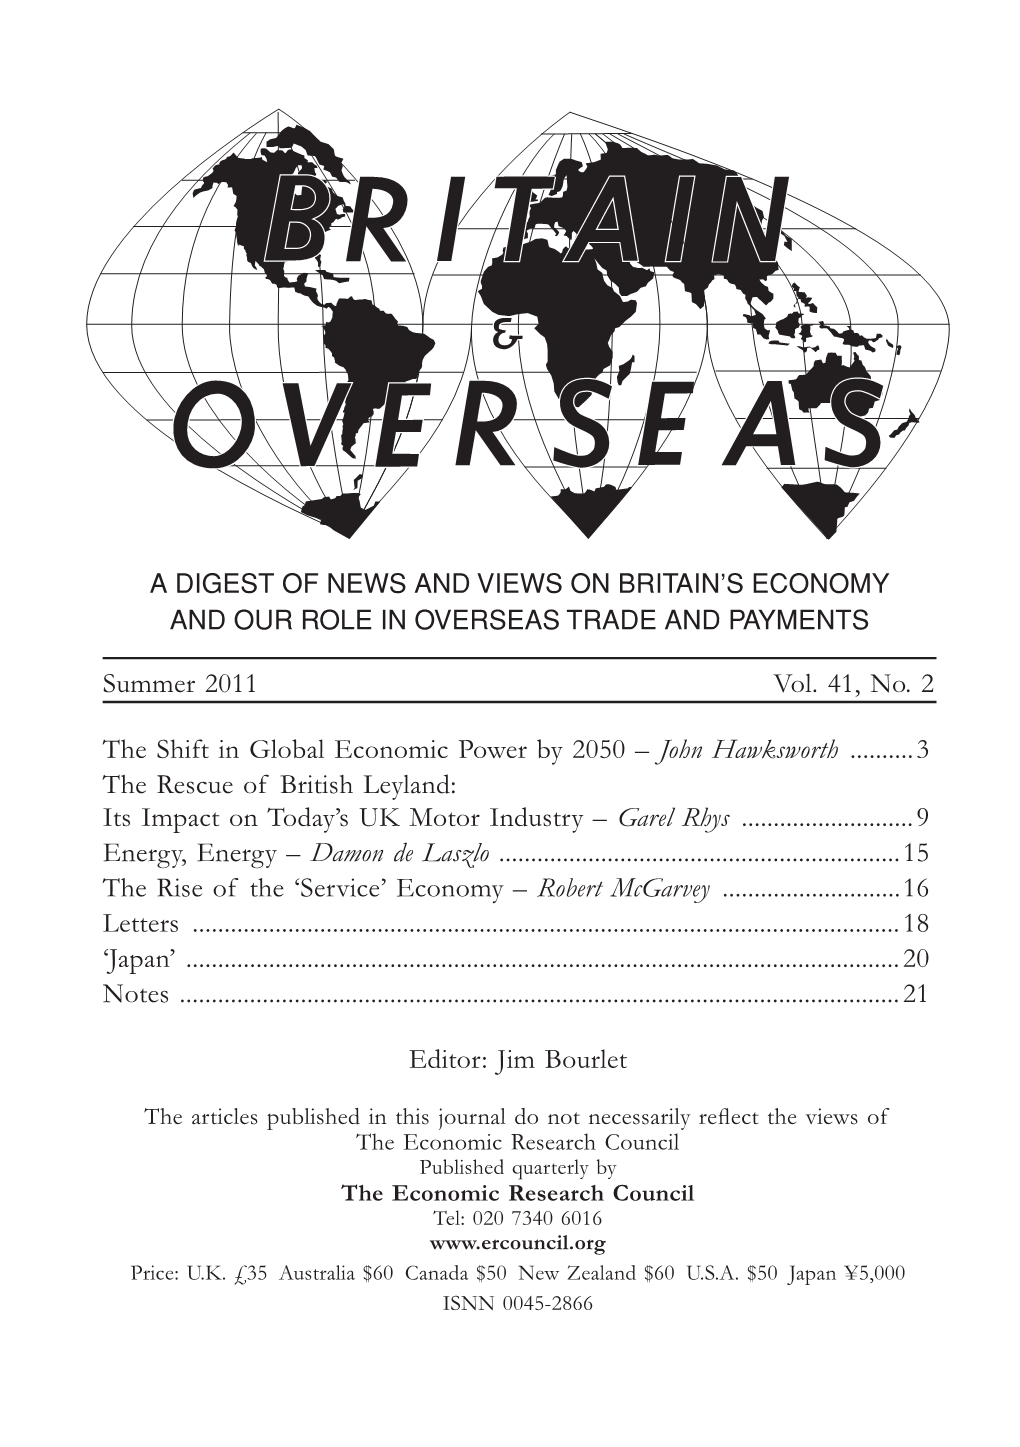 Summer 2011 Vol. 41, No. 2 the Shift in Global Economic Power by 2050 – John Hawksworth ...3 the Rescue of British